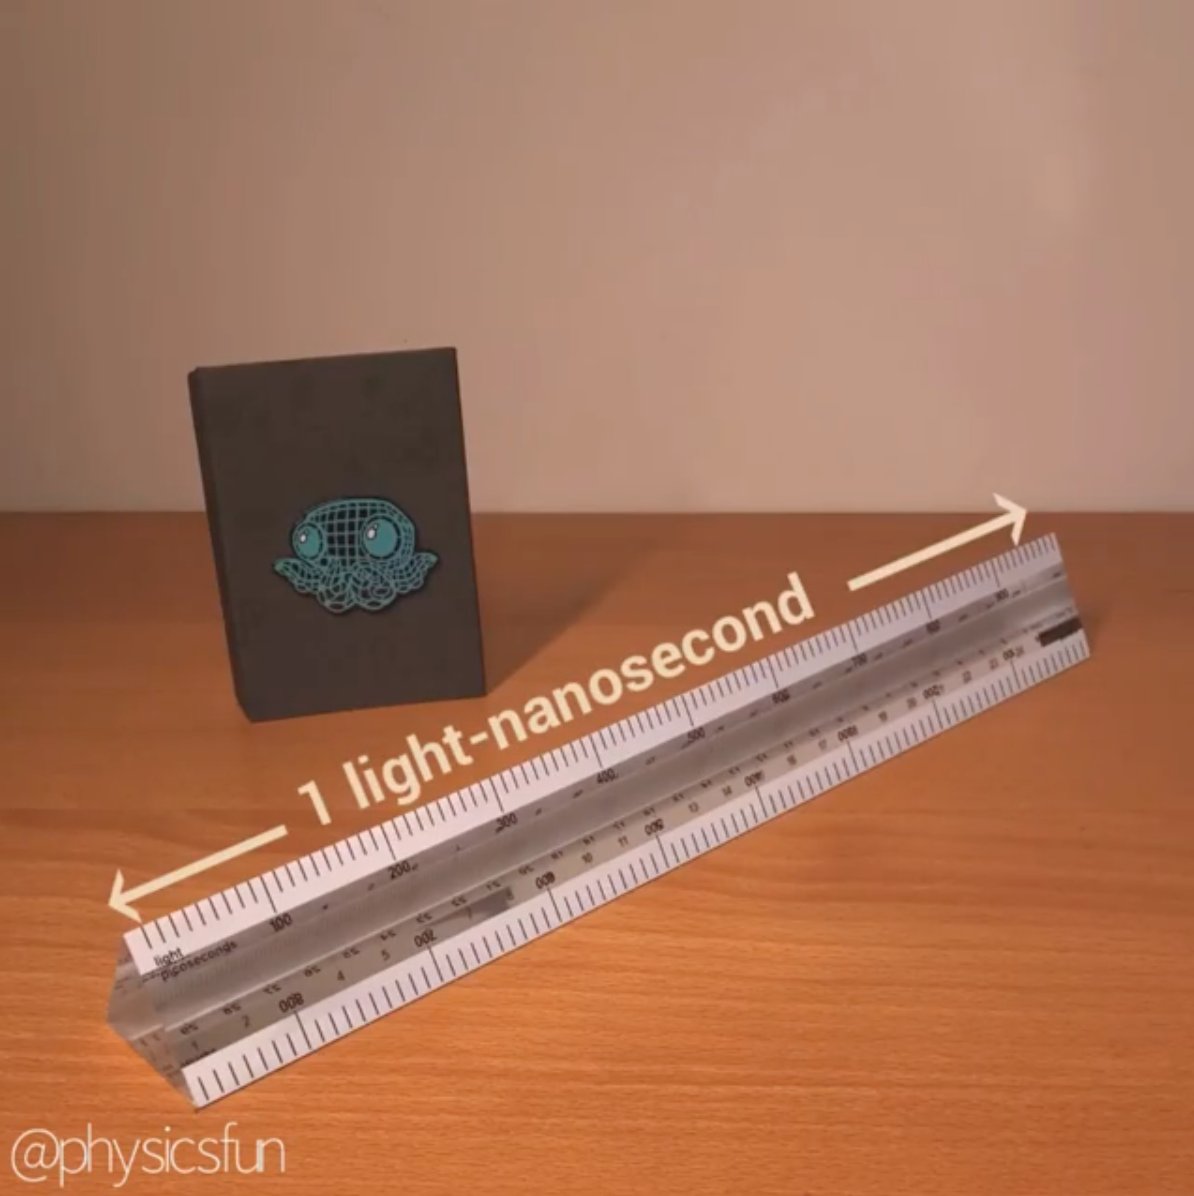 kobber Smuk kvinde pensionist Vsauce on Twitter: "Our light-nanosecond ruler was featured on PHYSICSFUN!  https://t.co/nxfCUGNwU9 We're pretty excited, so while supplies last, if  you subscribe to the Curiosity Box we'll throw in Box XIII (which contains